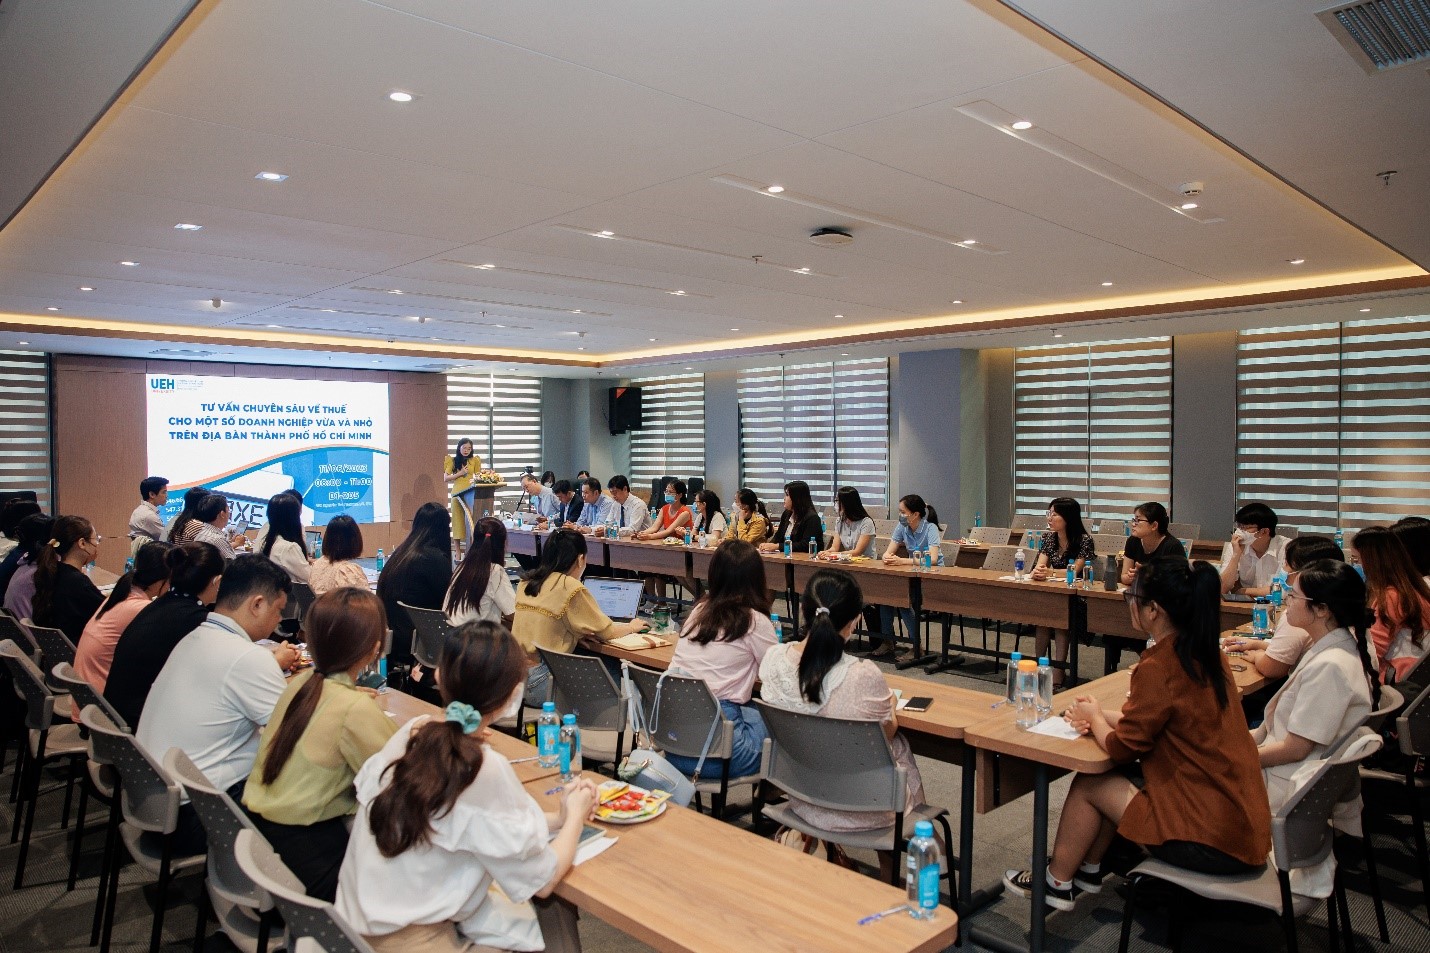 School of Public Finance, UEH College of Economics, Law and Government hosted intensive tax consulting activities for small and medium-sized enterprises based in Ho Chi Minh City.